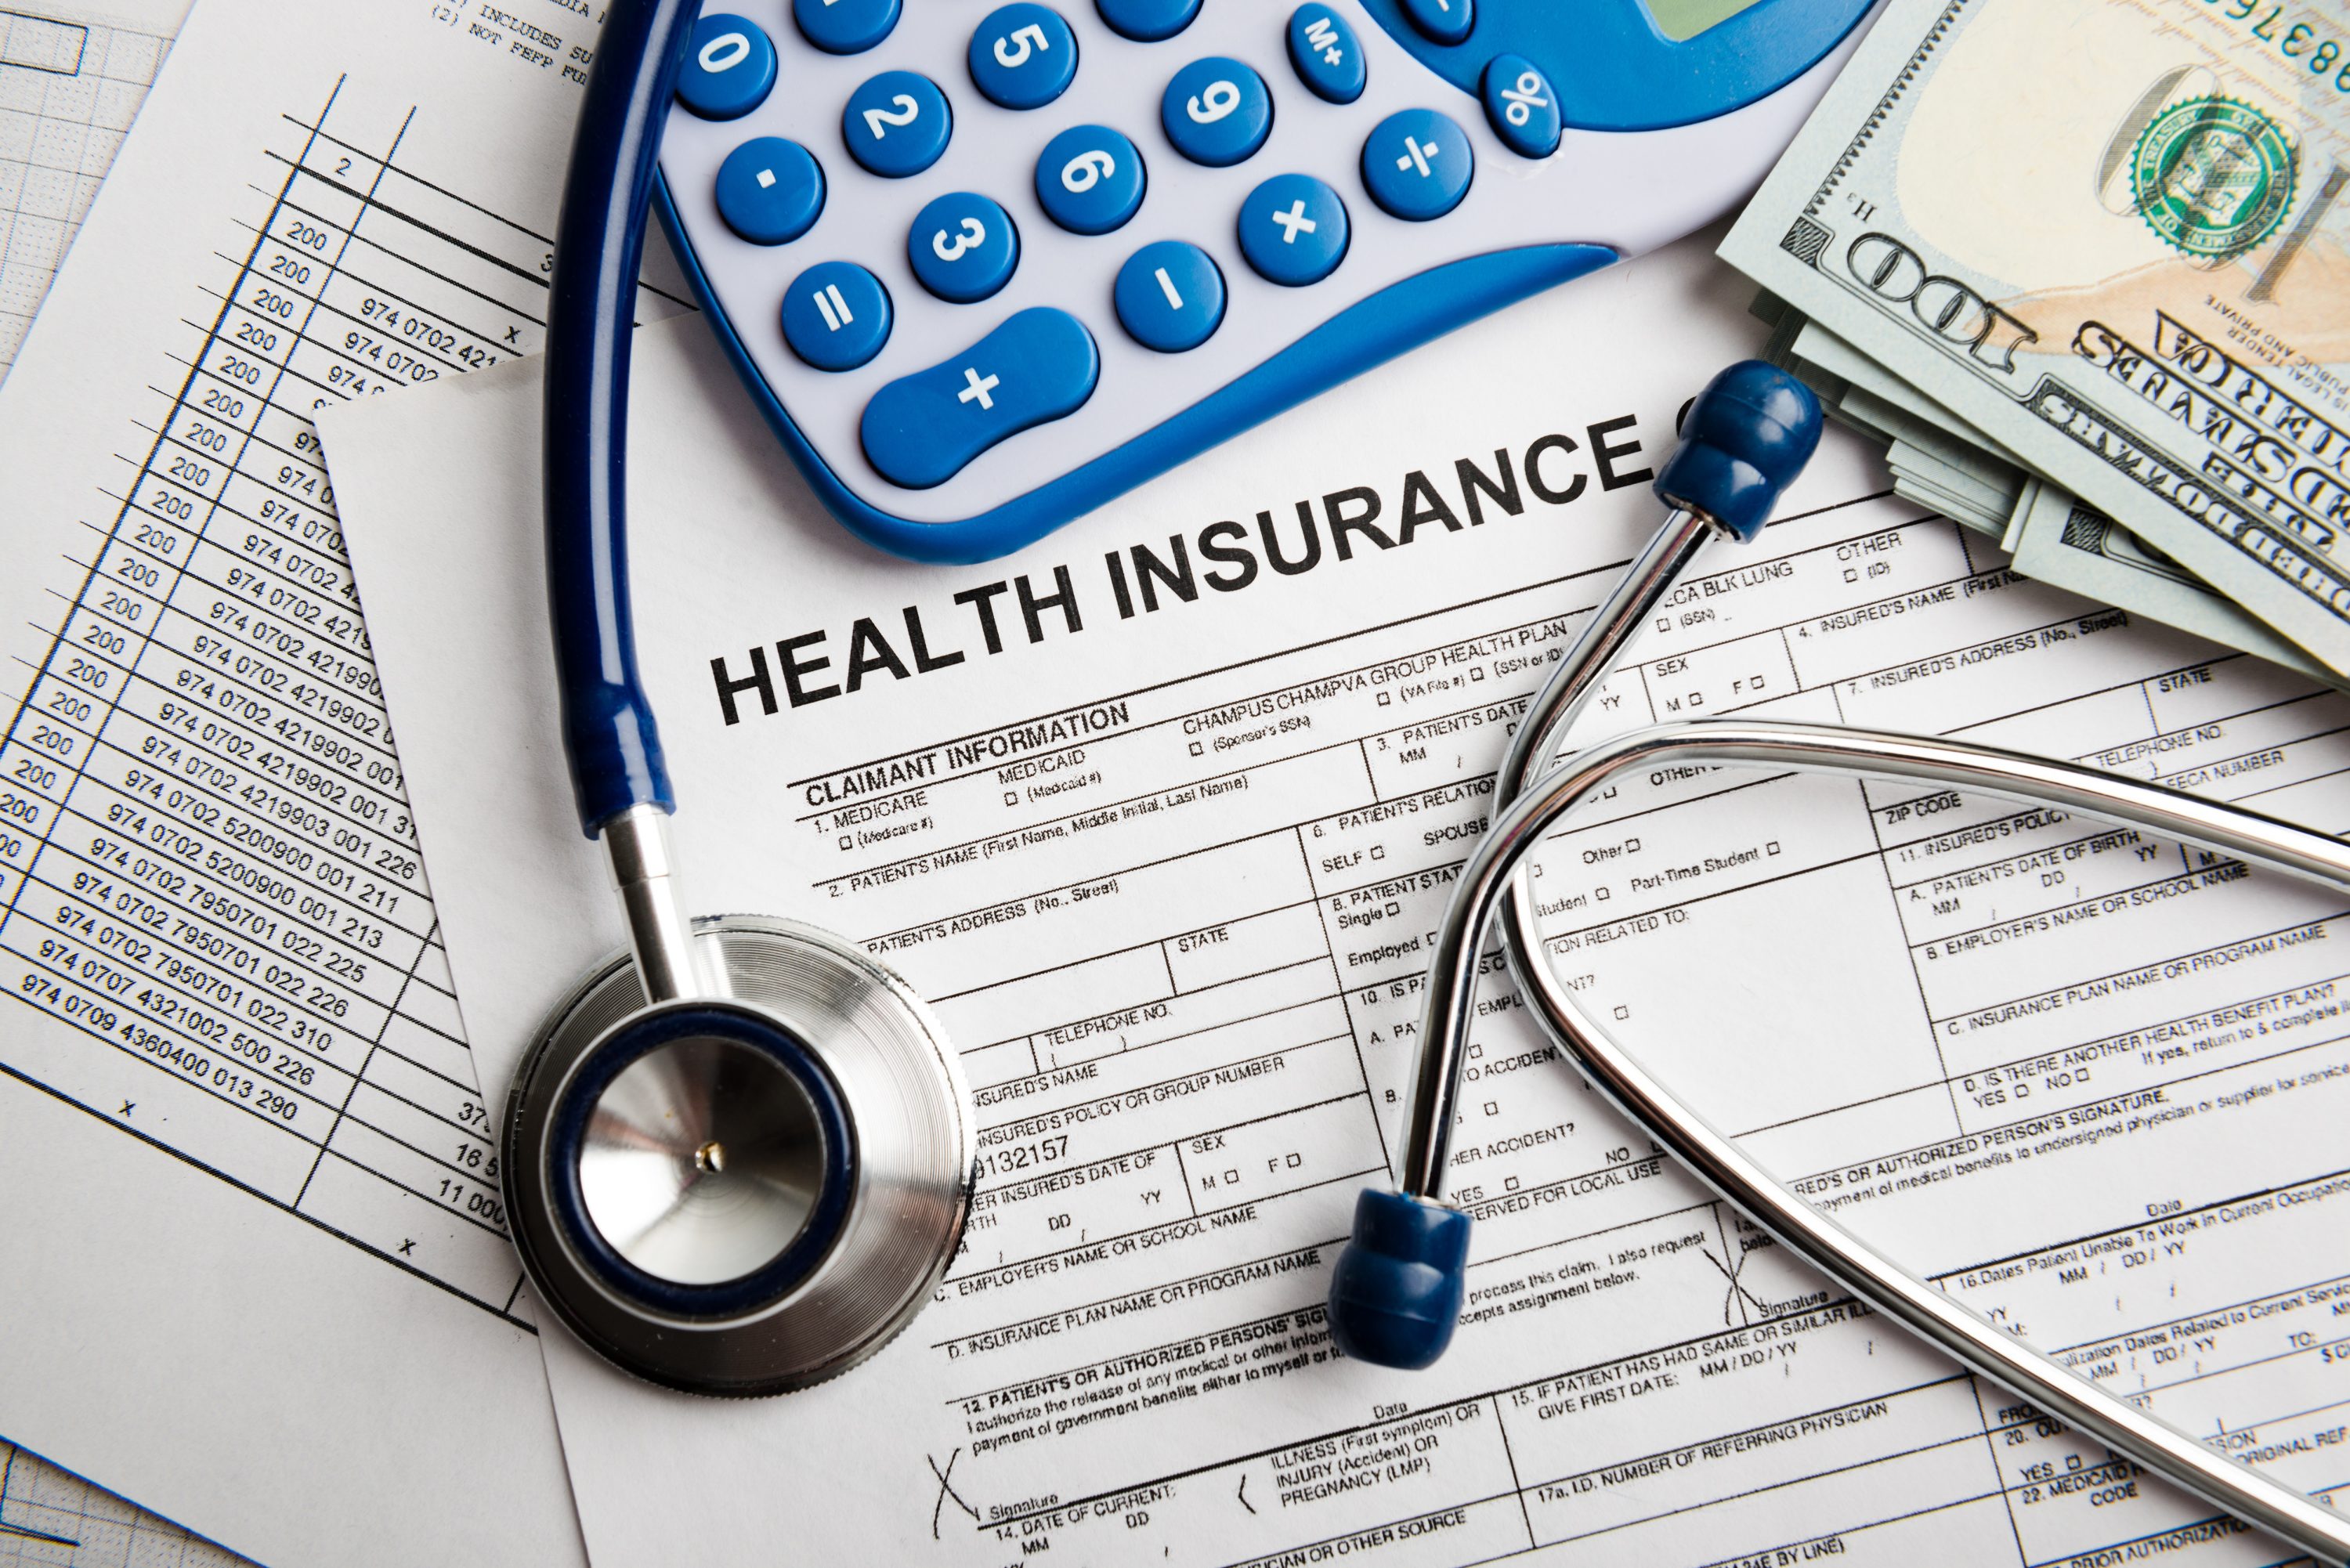 Health Plans and Insurance Information: Understanding Your Options for Comprehensive Coverage